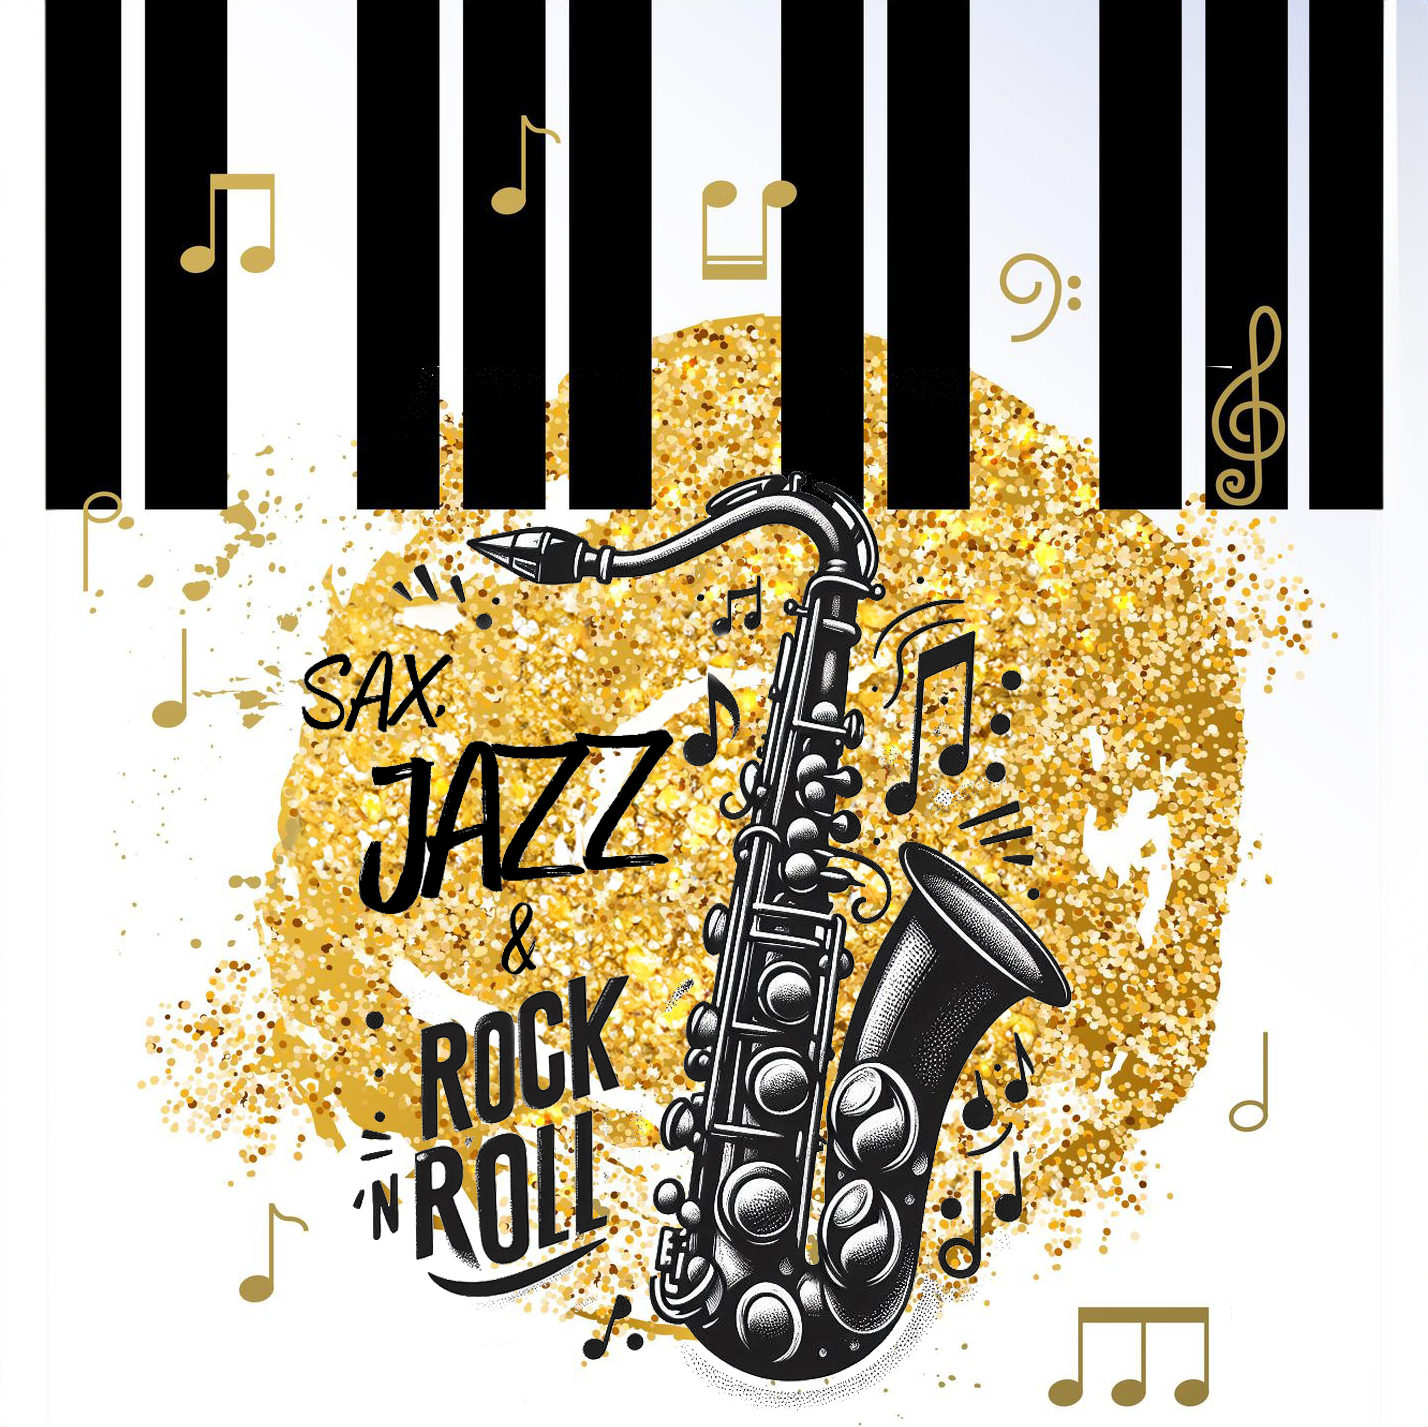 Sax Jazz and rock n'roll